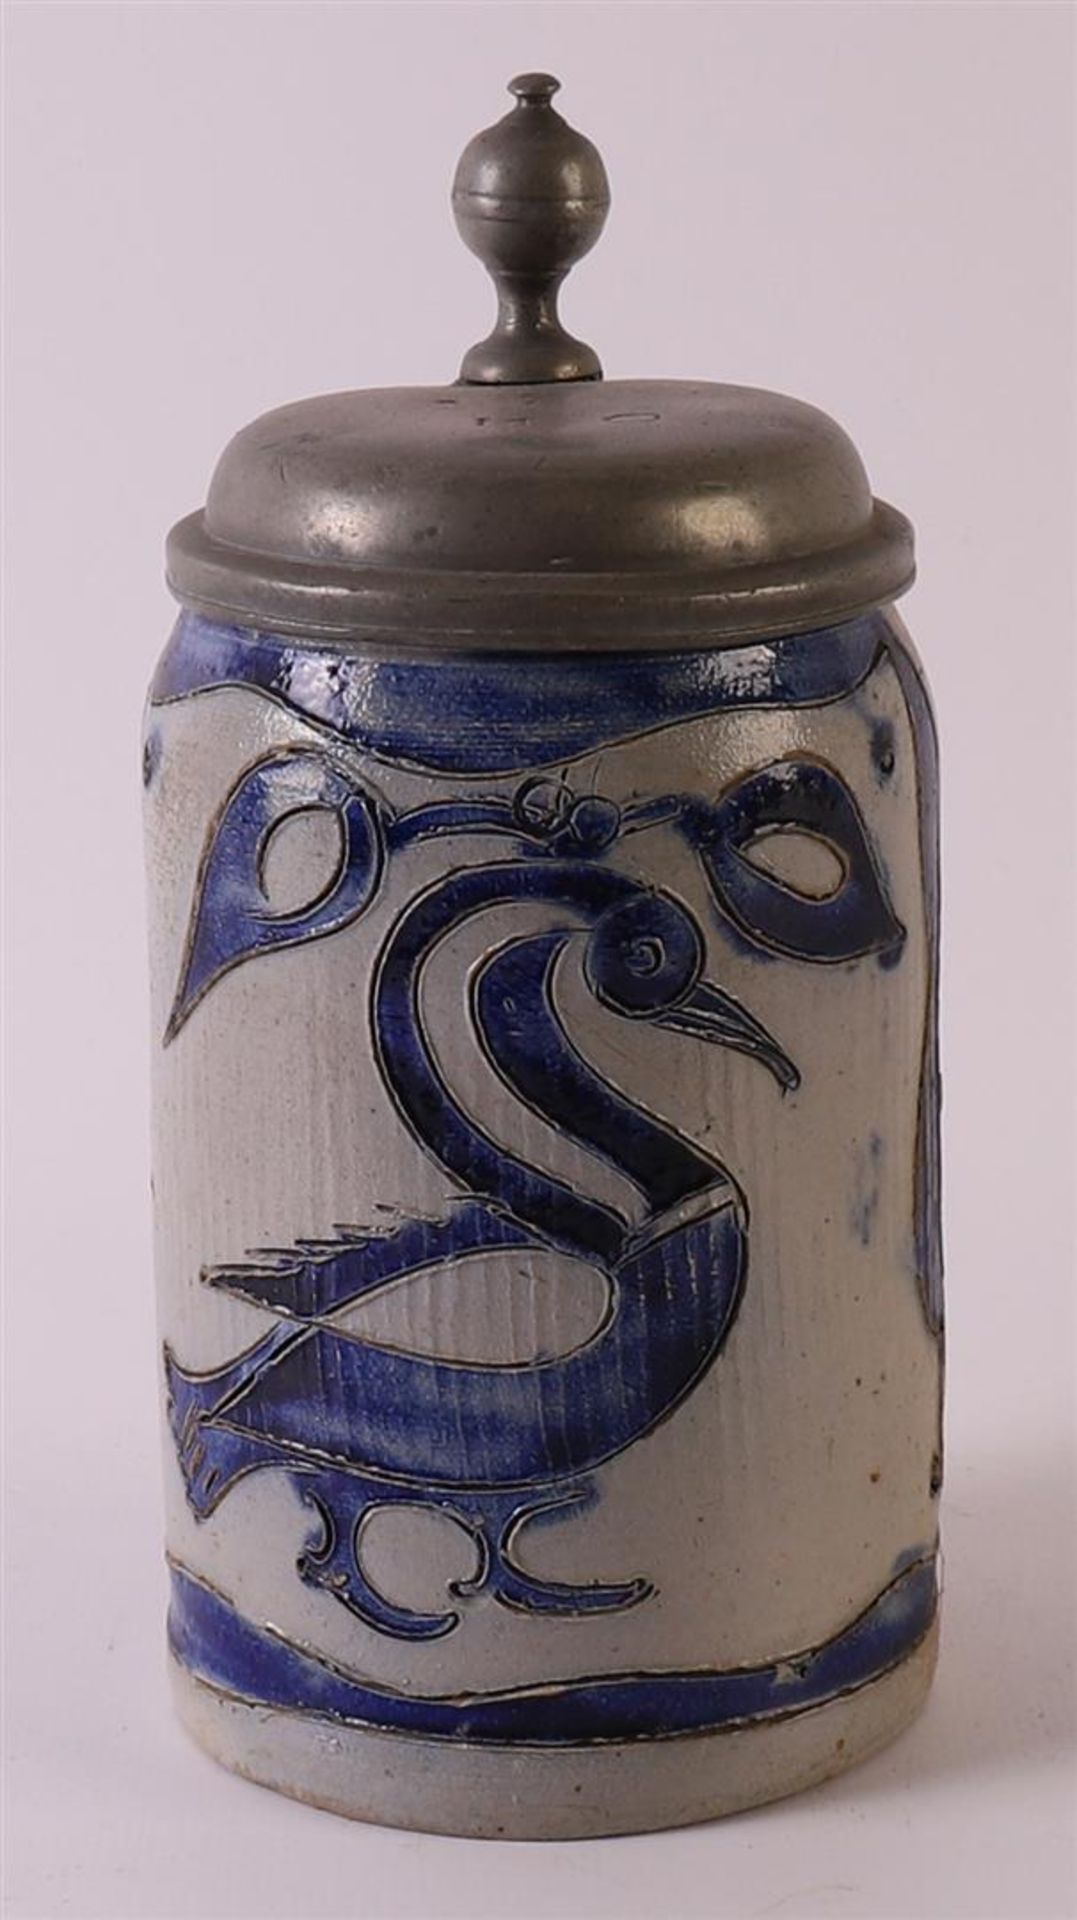 A gray 'gres' stoneware beer mug with blank pewter lid, Germany 18th century. Blue underglaze